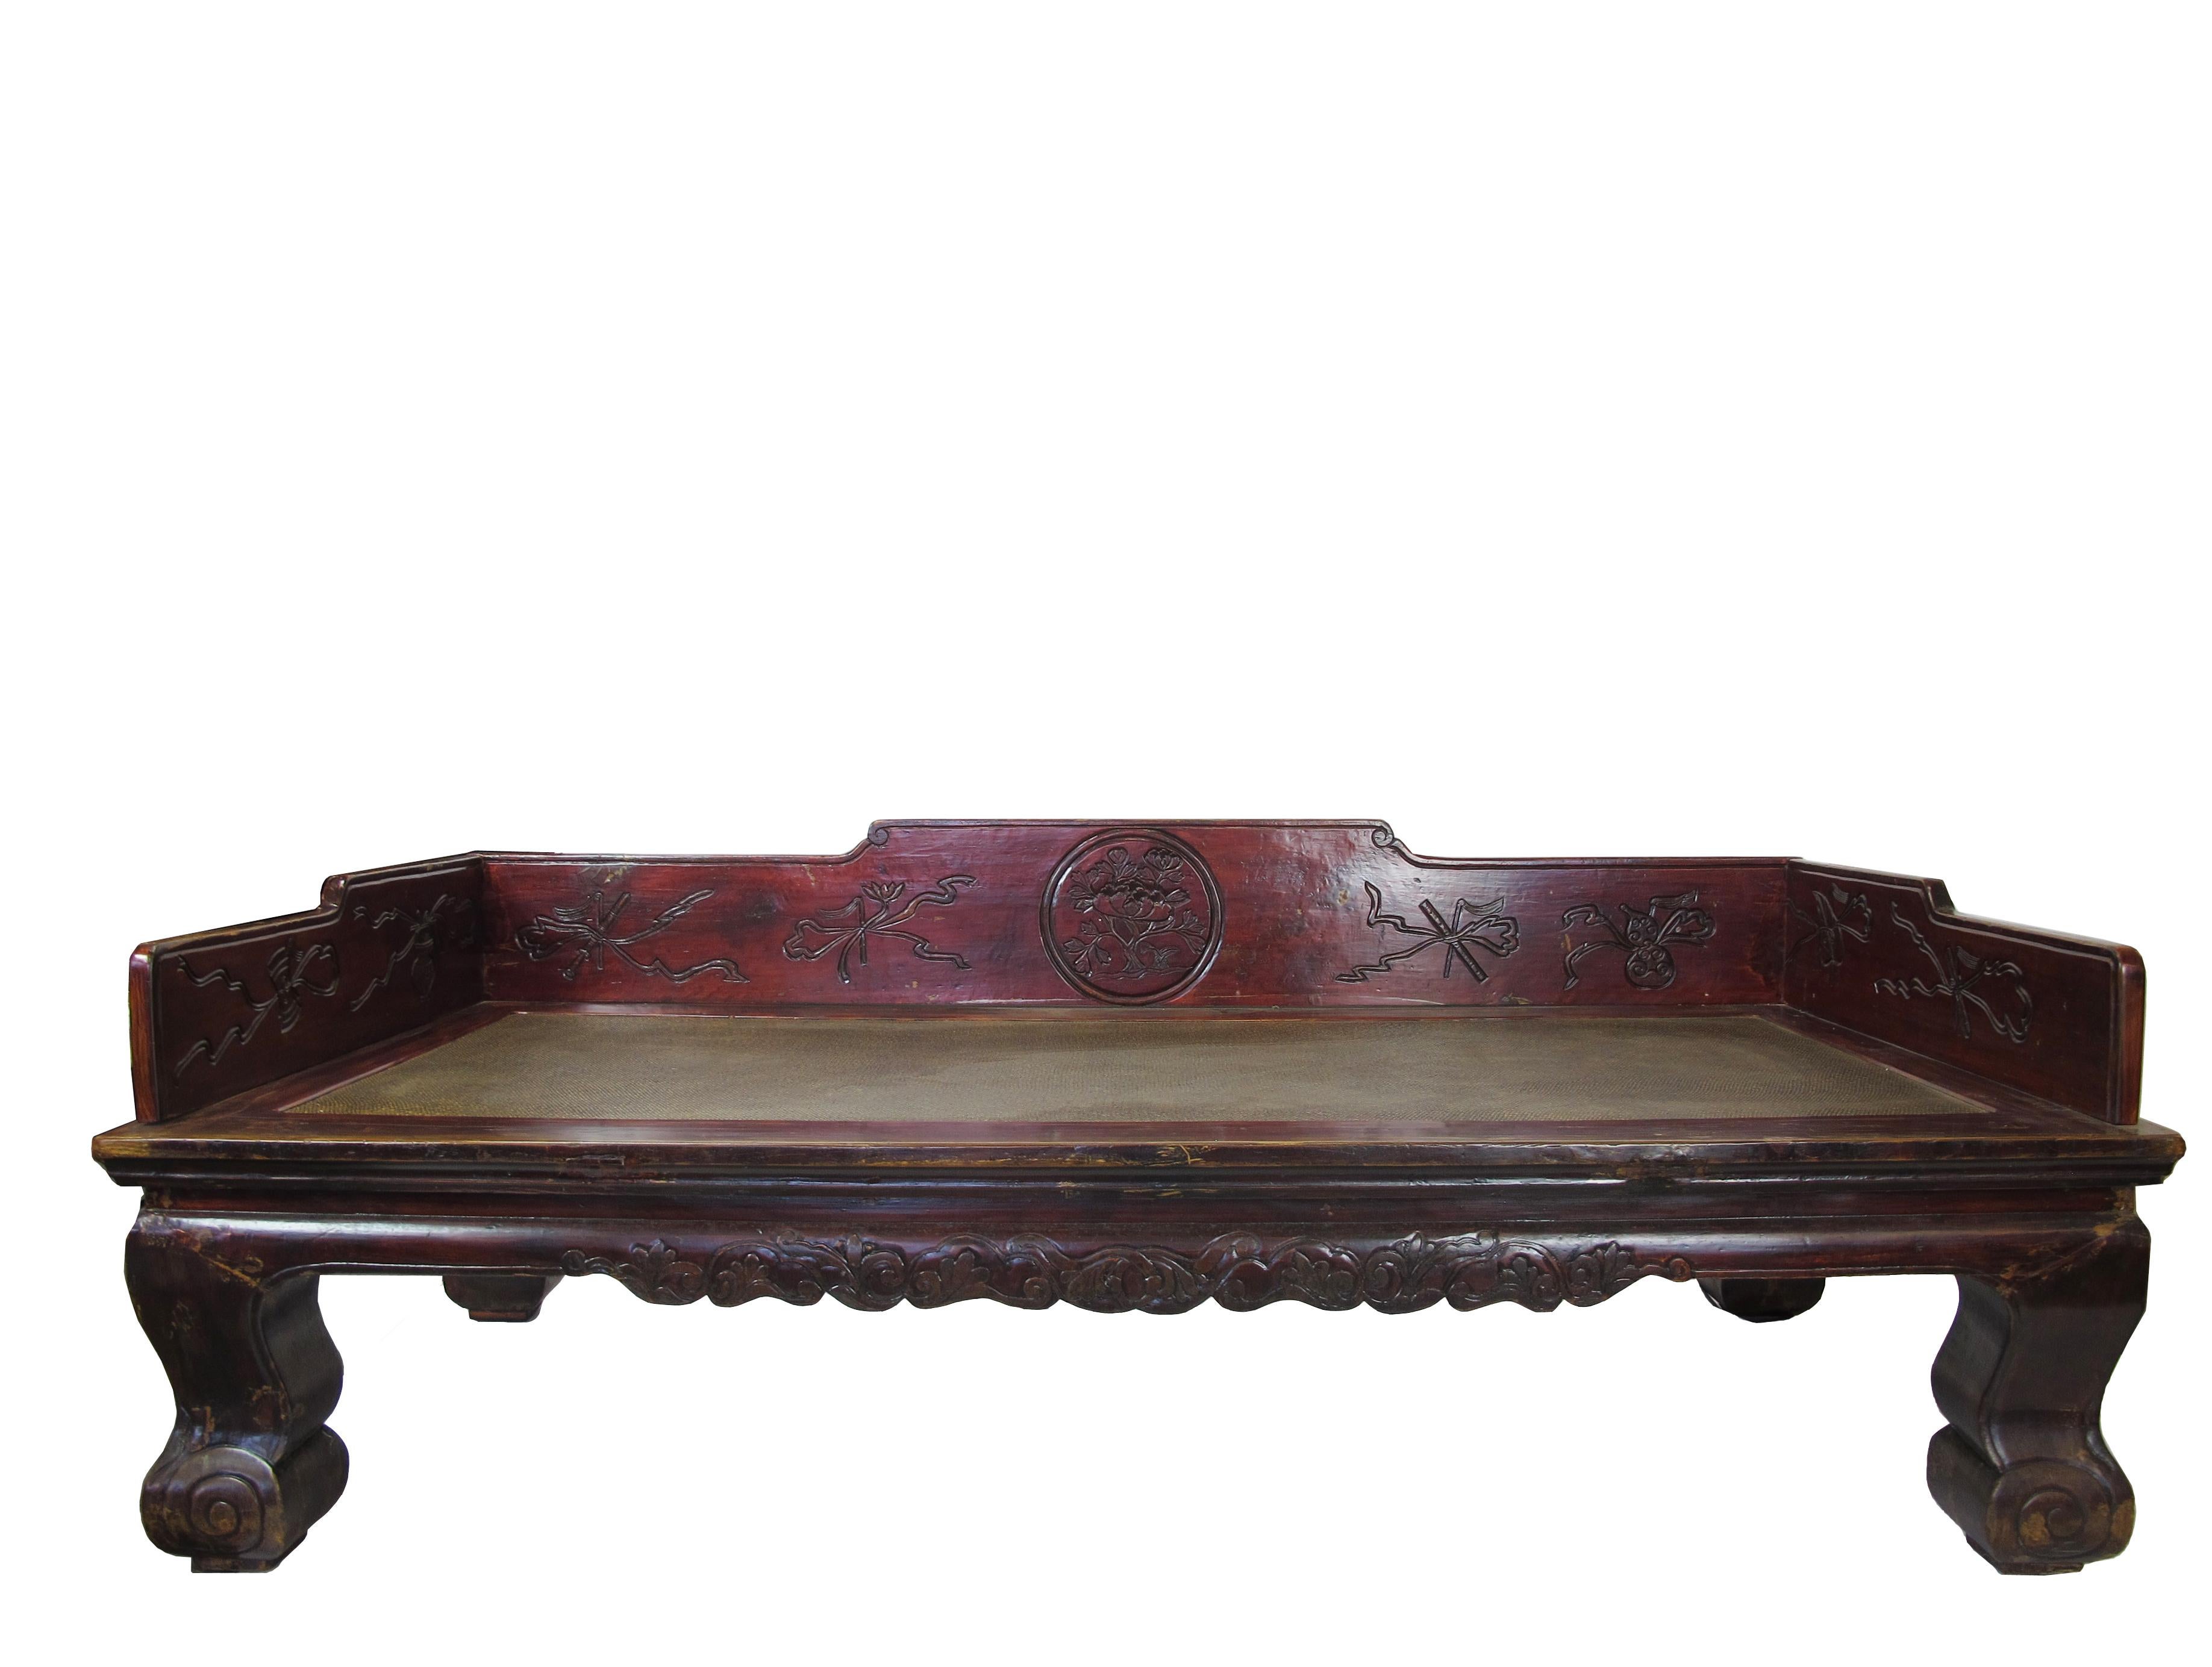 This large authentic antique Chinese daybed is also known as Luohan bed or Opium bed. The rails and frames are crafted from single planks of wood (no seams). Simple and elegant carving adorn inside of the rails and front strip. The scrolled legs